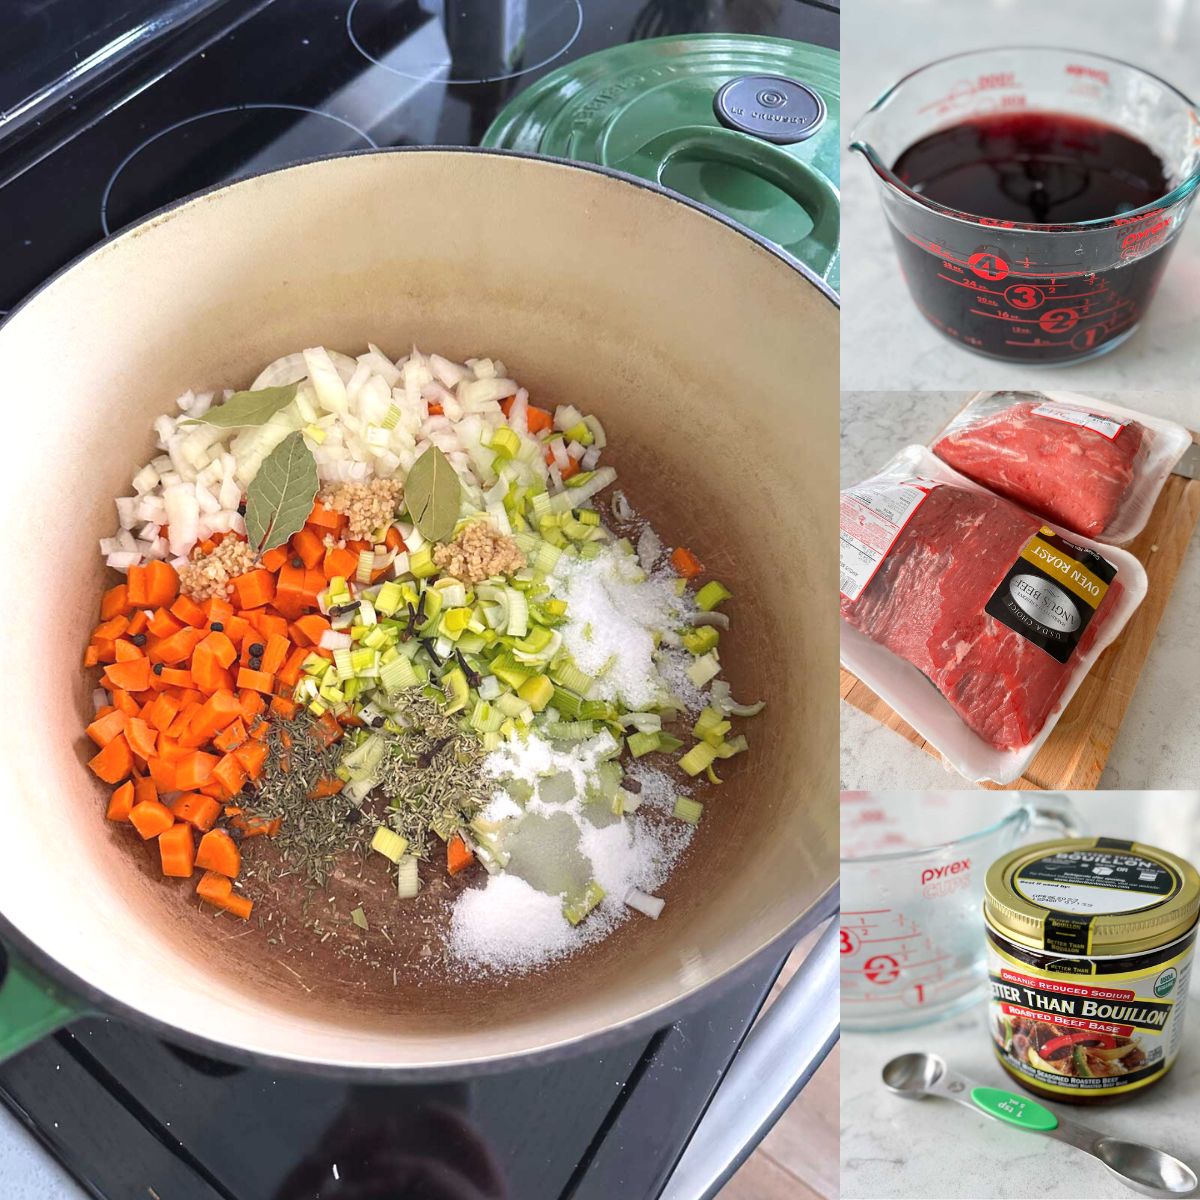 A photo collage shows a pot filled with the marinade ingredients, the beef, a measuring cup of wine, and beef bouillon.